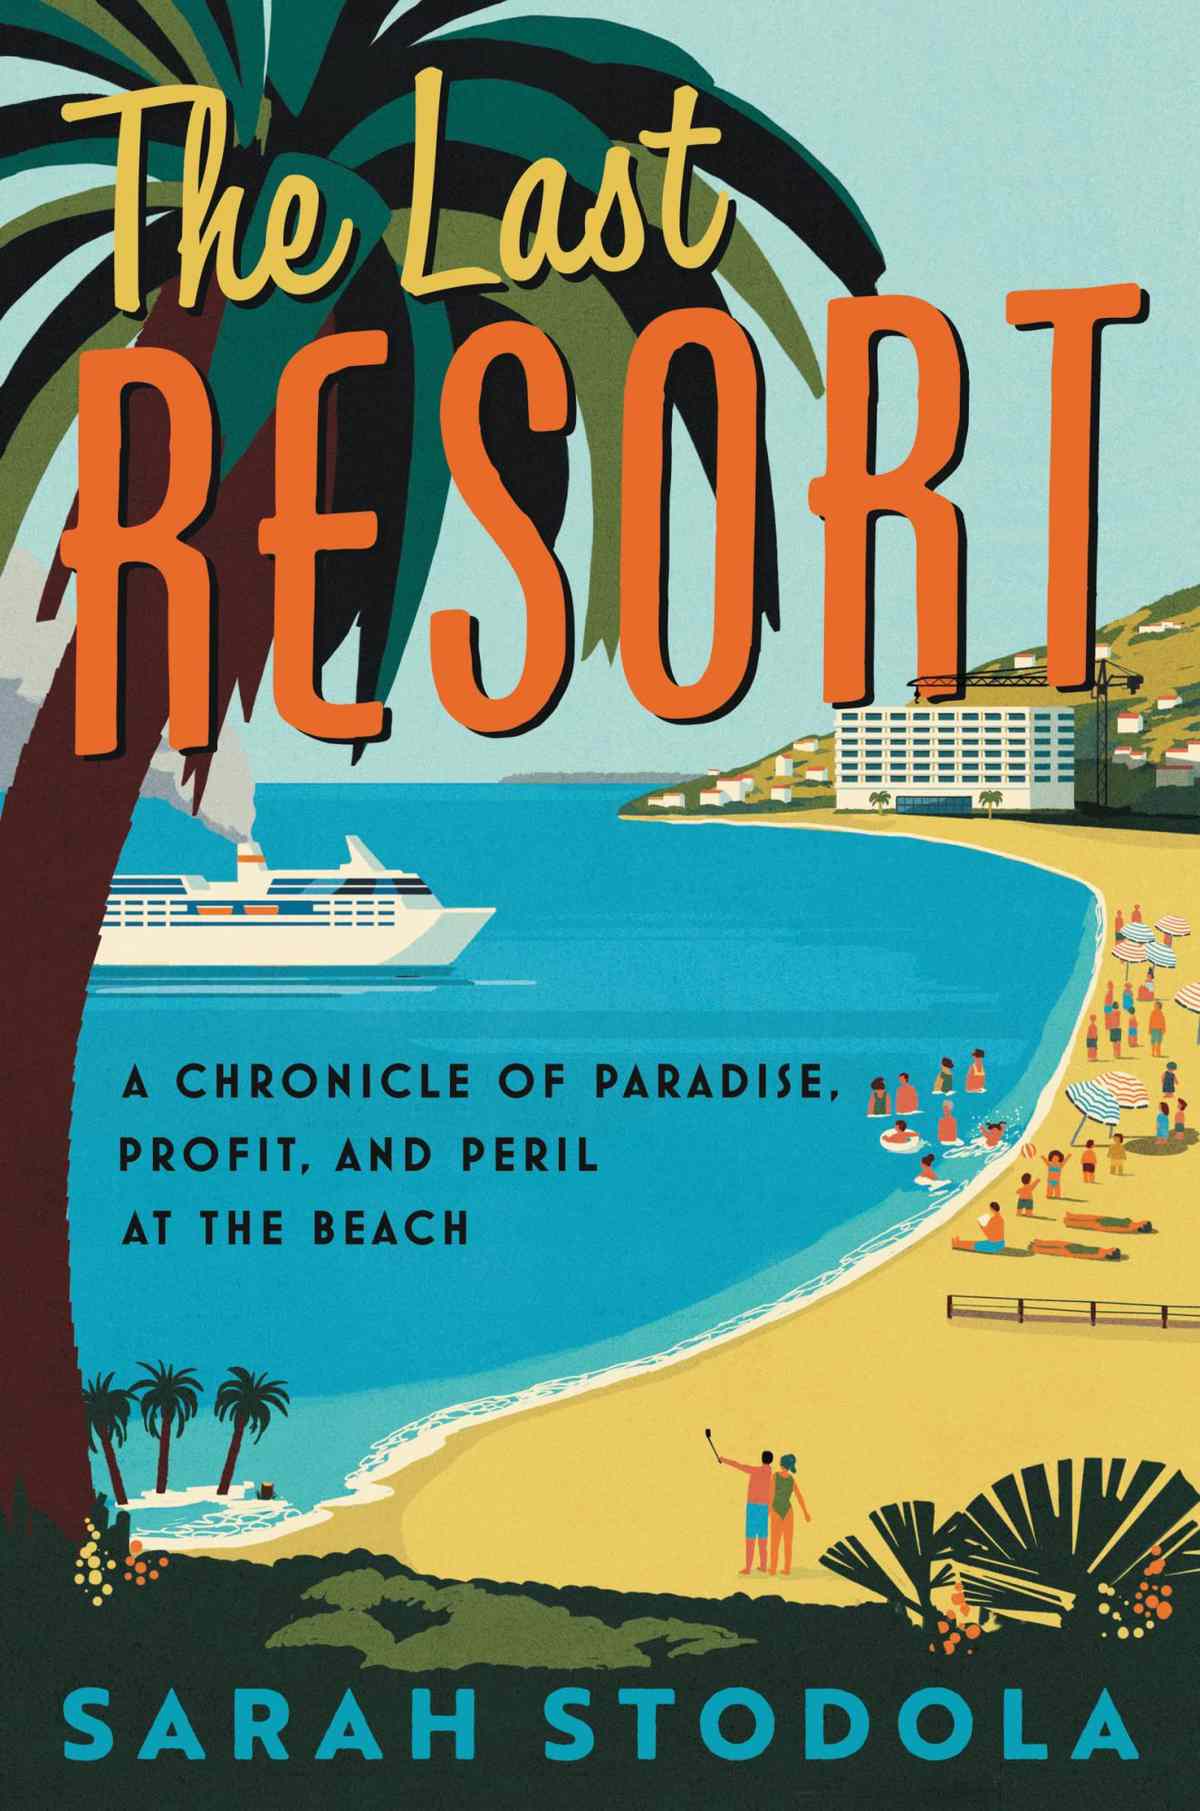 The Last Resort: A Chronicle of Paradise, Profit, and Peril at the Beach by Sarah Stodola